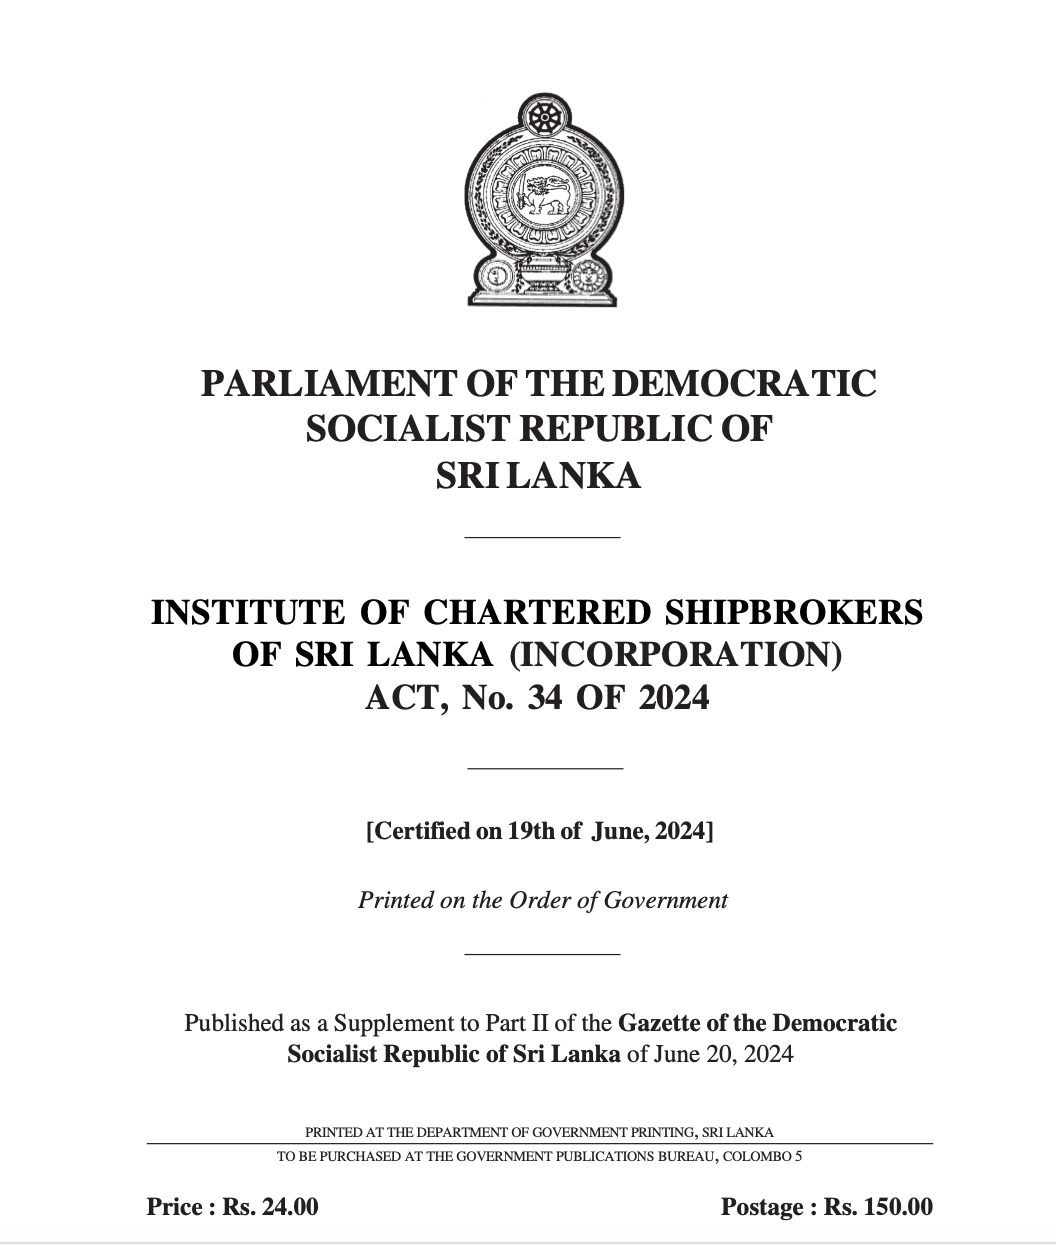 Institute of Chartered Shipbrokers of Sri Lanka incorporated by an Act of Parliament